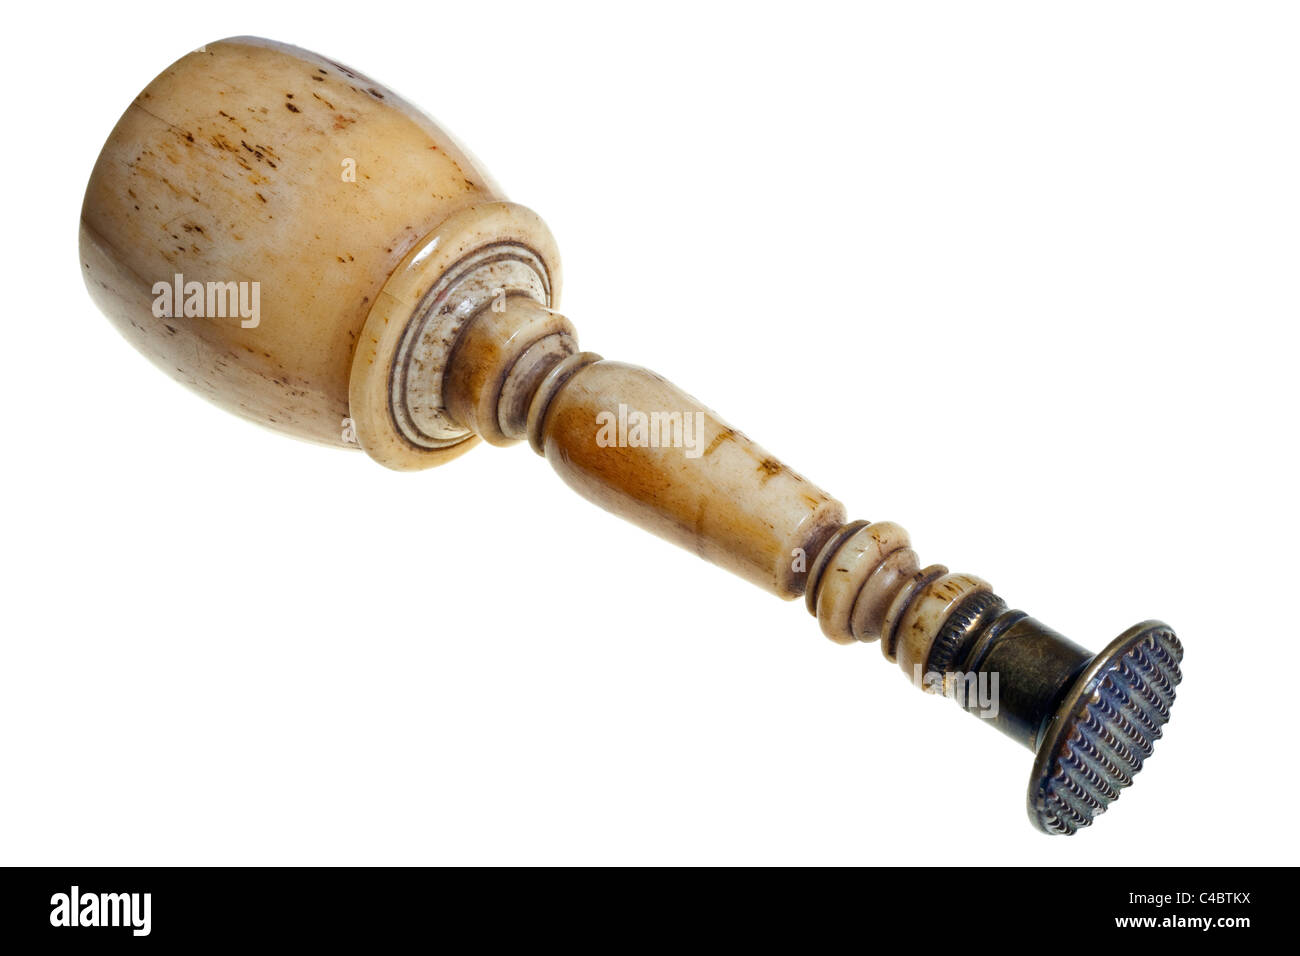 Antique turned bone or ivory and brass sealing wax impression tool photographed against a pure white background. JMH4977 Stock Photo